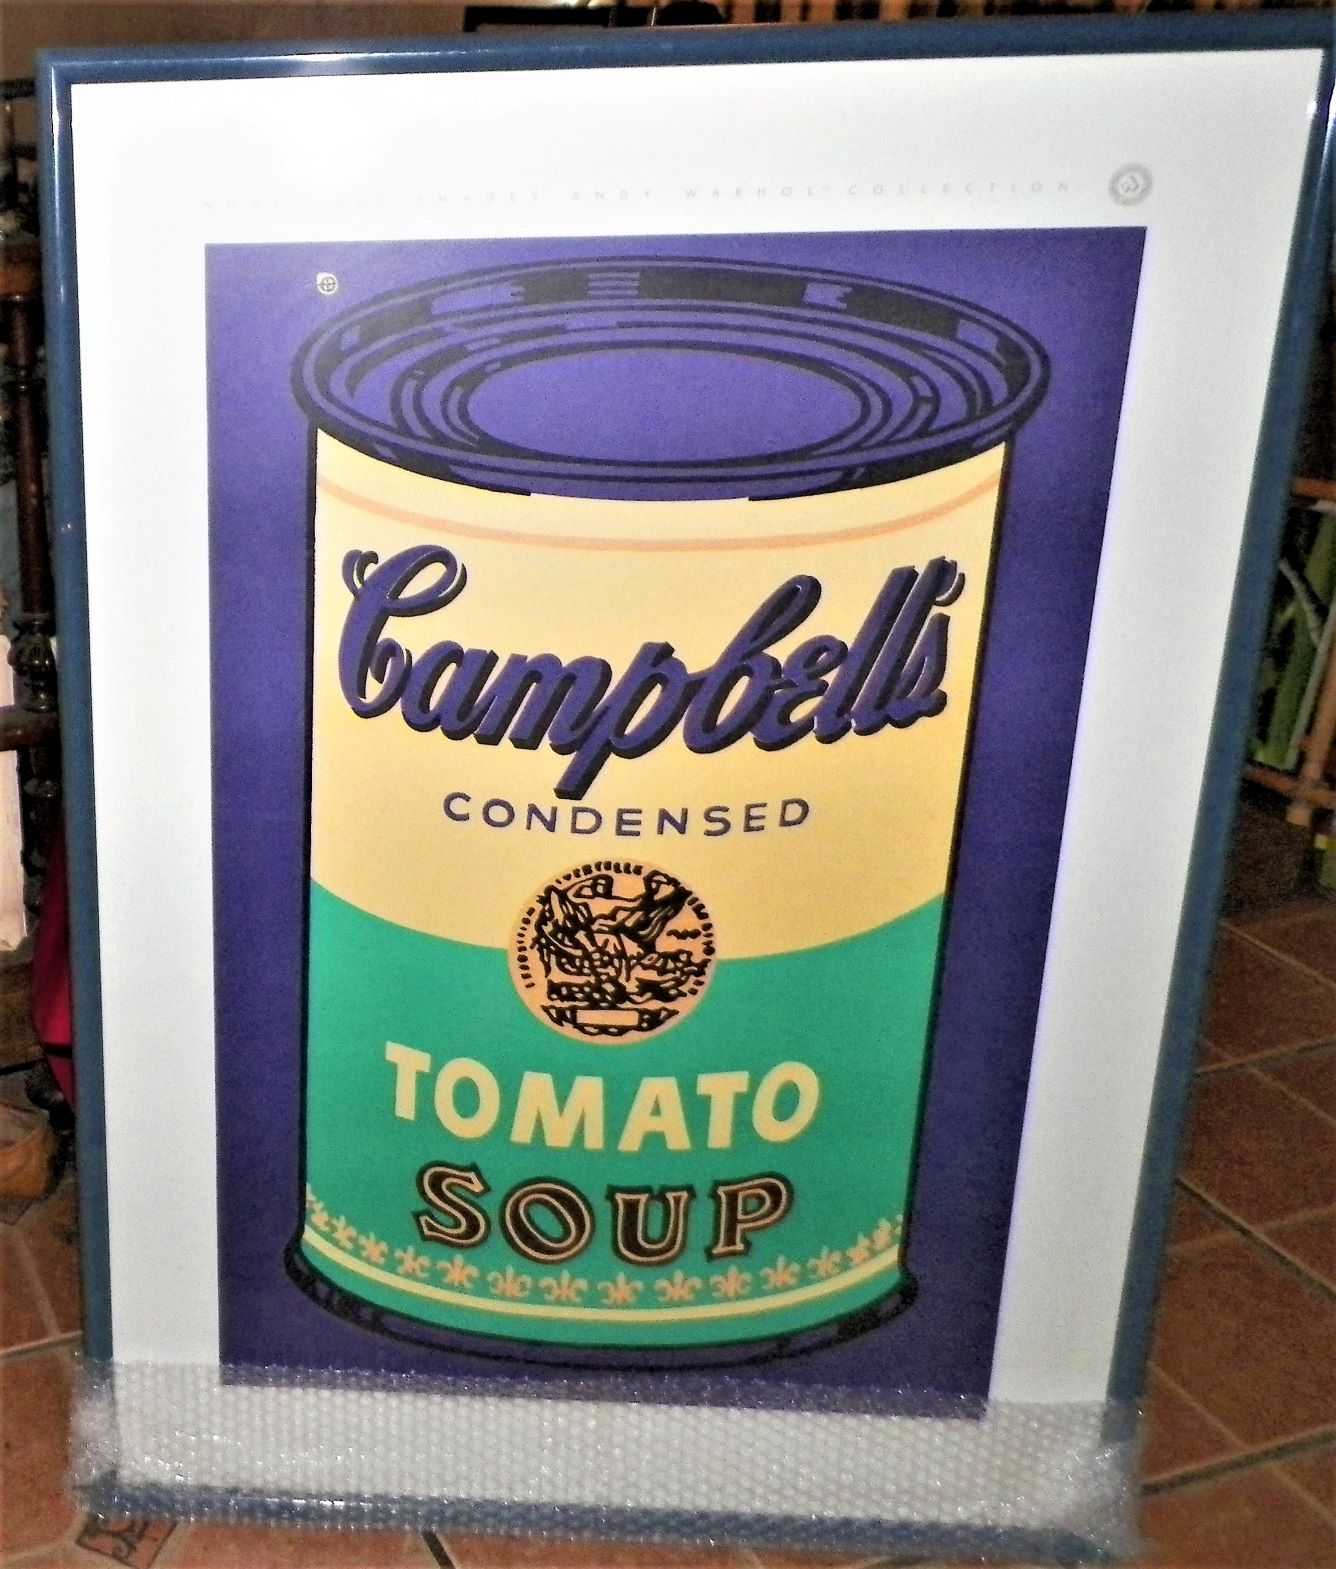 ART PRINT CAMPBELL SOUP CAN ANDY WARHOL FOUNDATION MOUVELLE IMAGES 1AA.JPG